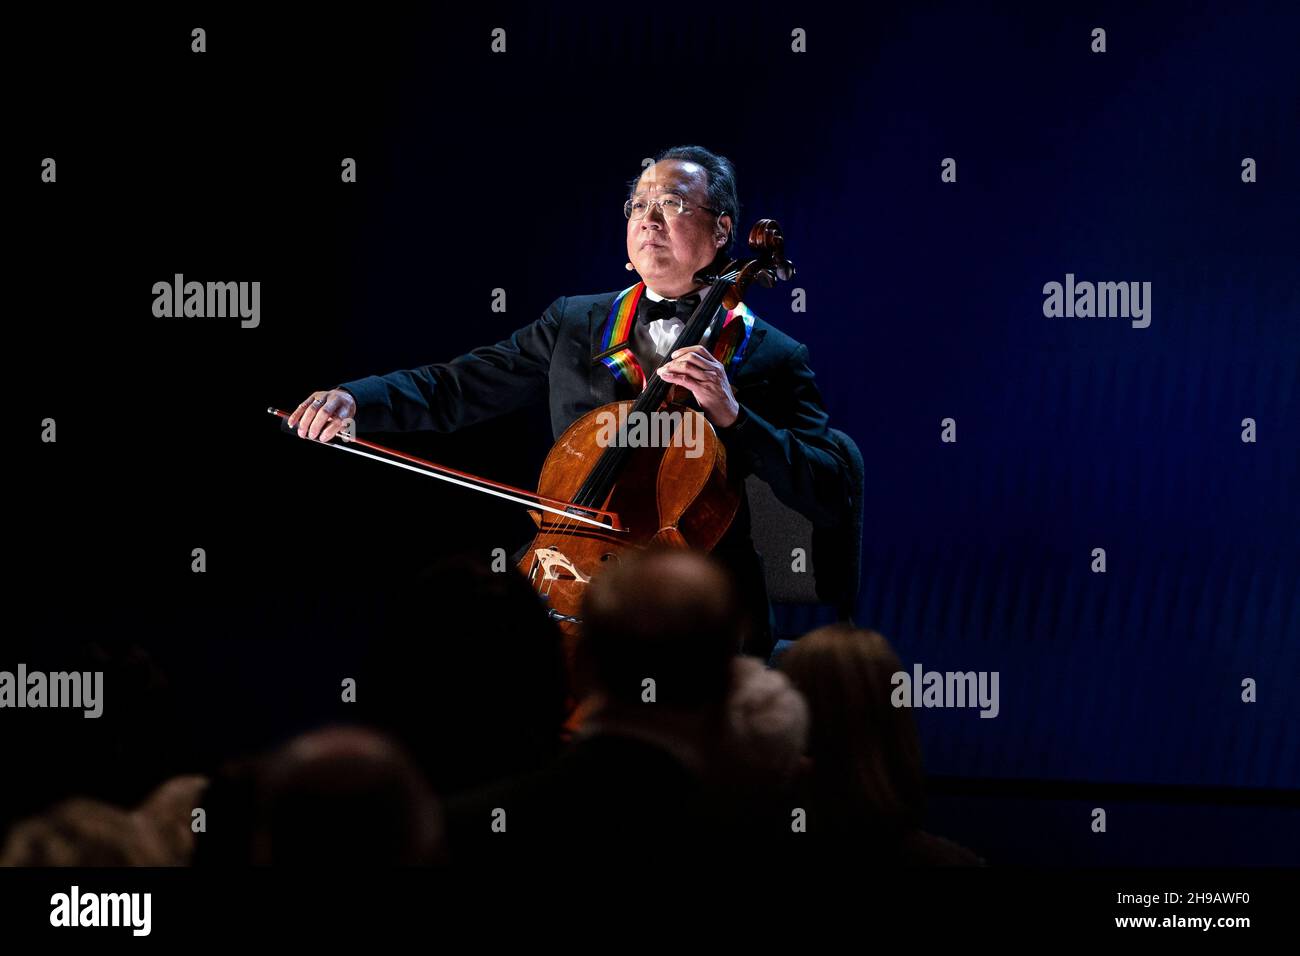 Cellist Yo-Yo Ma performs the National Anthem during the the 44th Kennedy Center Honors at the John F. Kennedy Center for the Performing Arts in Washington, DC, U.S., on Sunday, Dec. 5, 2021. The 44th Honorees for lifetime artistic achievements include operatic bass-baritone Justino Diaz, Motown founder Berry Gordy, Saturday Night Live creator Lorne Michaels, actress Bette Midler, and singer-songwriter Joni Mitchell. Credit: Al Drago/Pool via CNP /MediaPunch Stock Photo